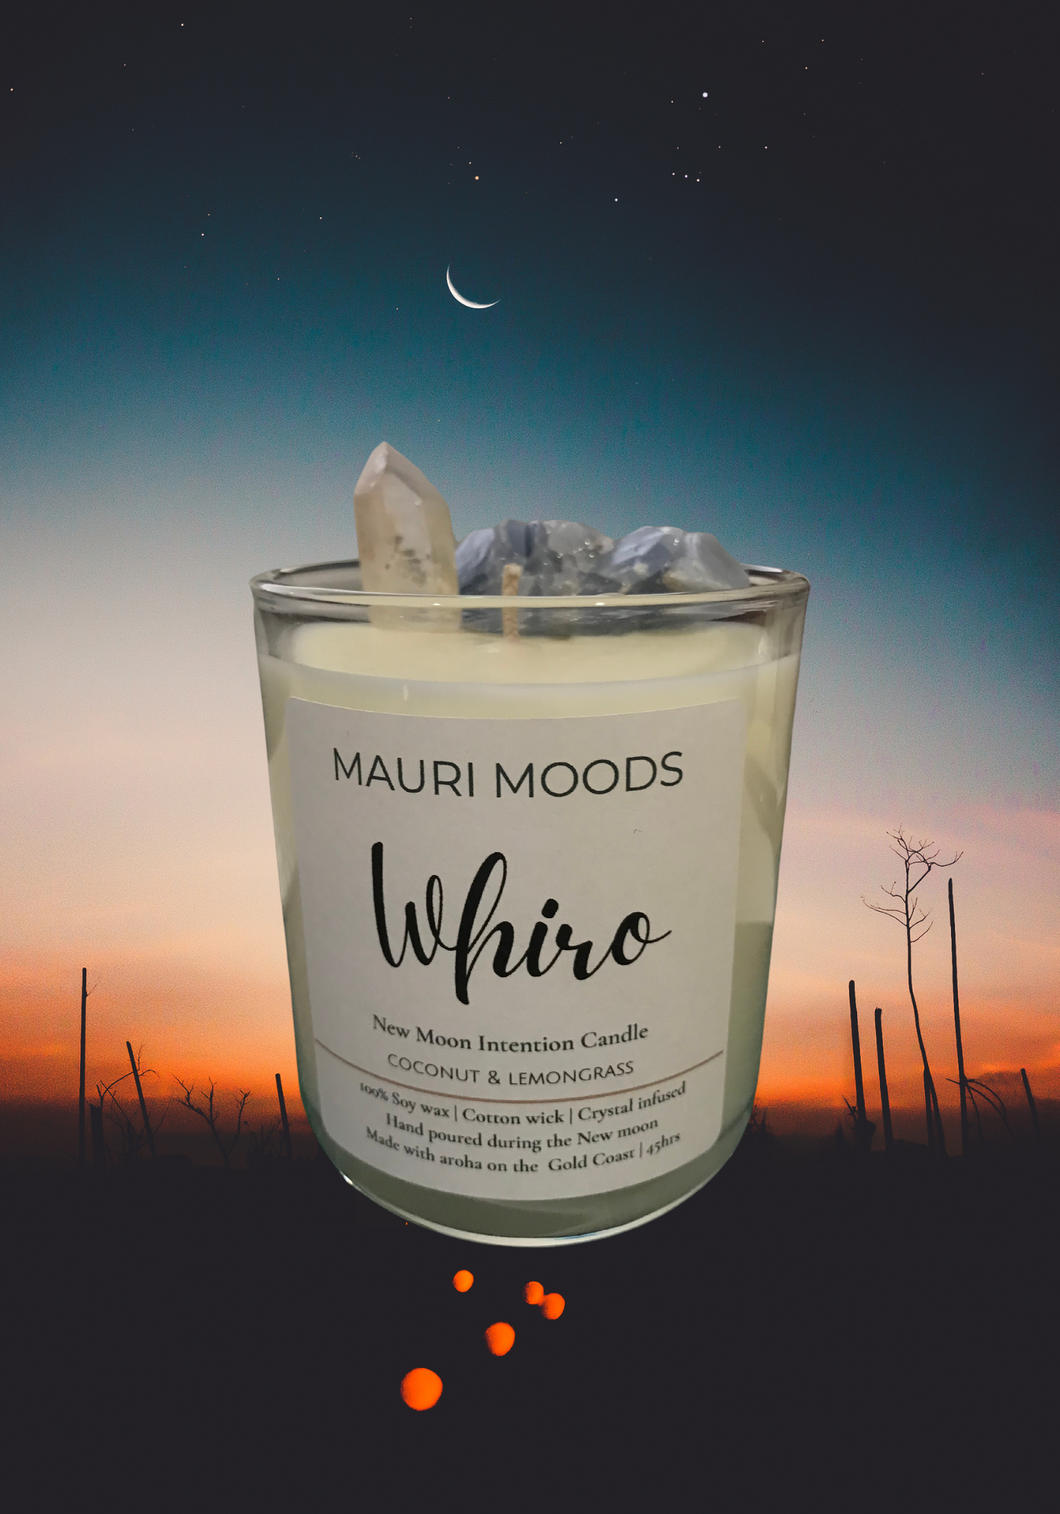 New Moon candle - Whiro